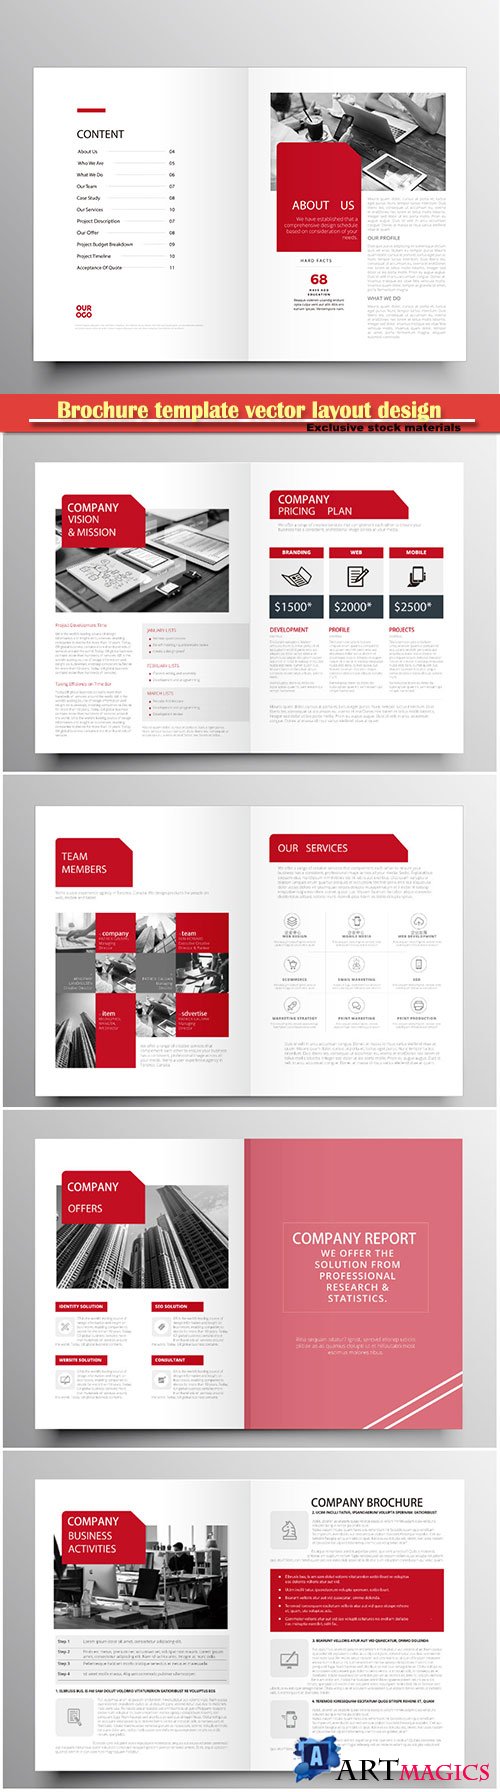 Brochure template vector layout design, corporate business annual report, magazine, flyer mockup # 181